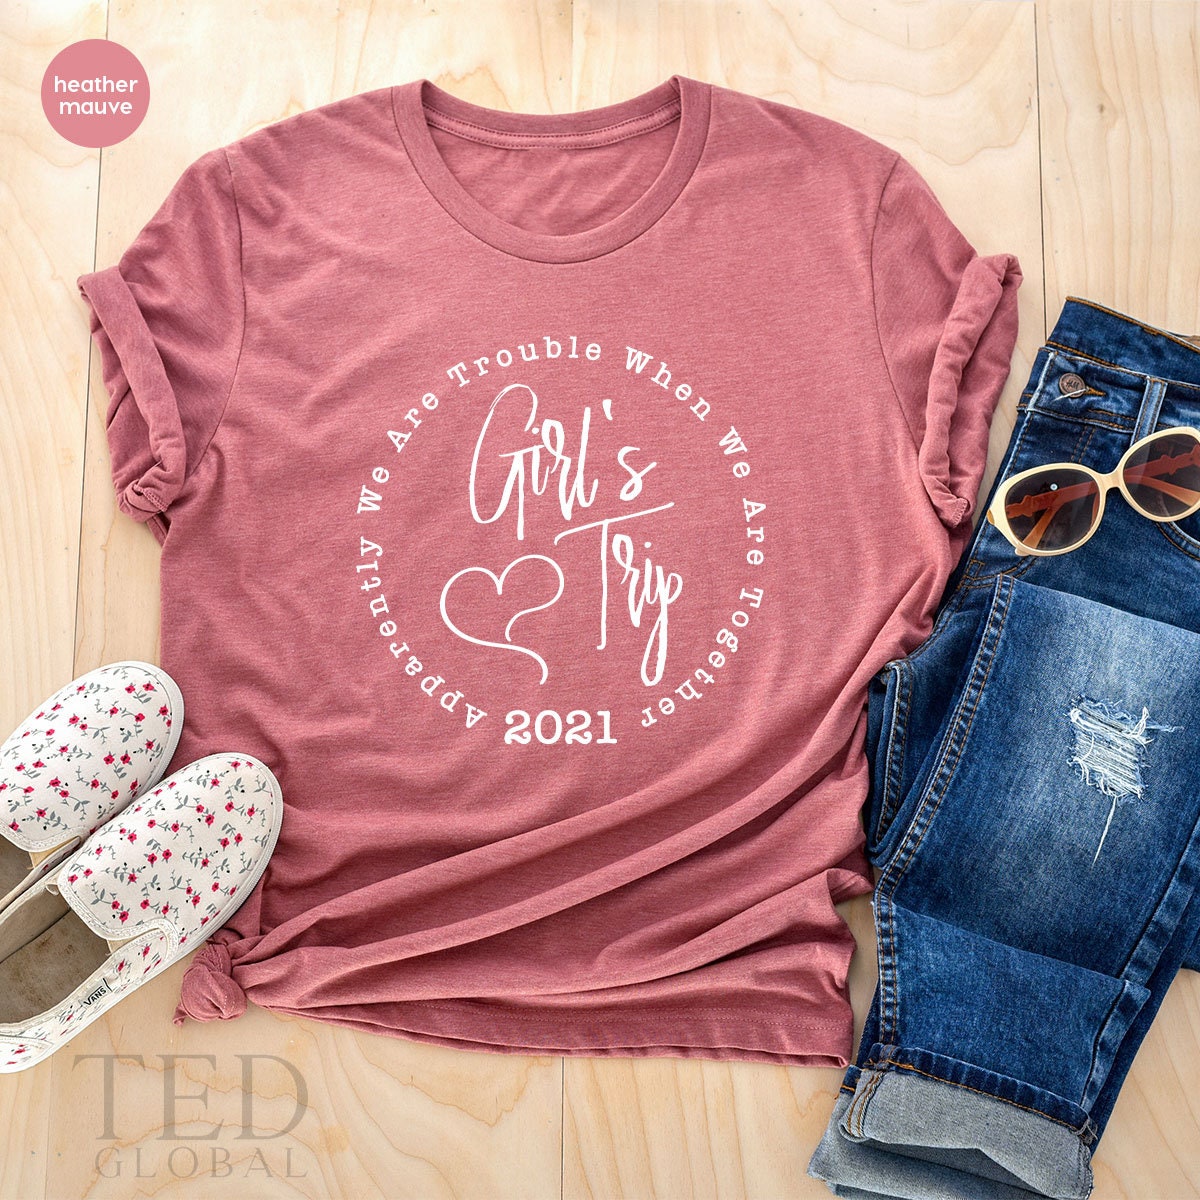 Girls Trip TShirt, Bestie Gift, Girls Party, Best Friend Vacation Shirt, Apparently We Are Trouble, Funny Girls Trip Gift,Best Friends Shirt - Fastdeliverytees.com